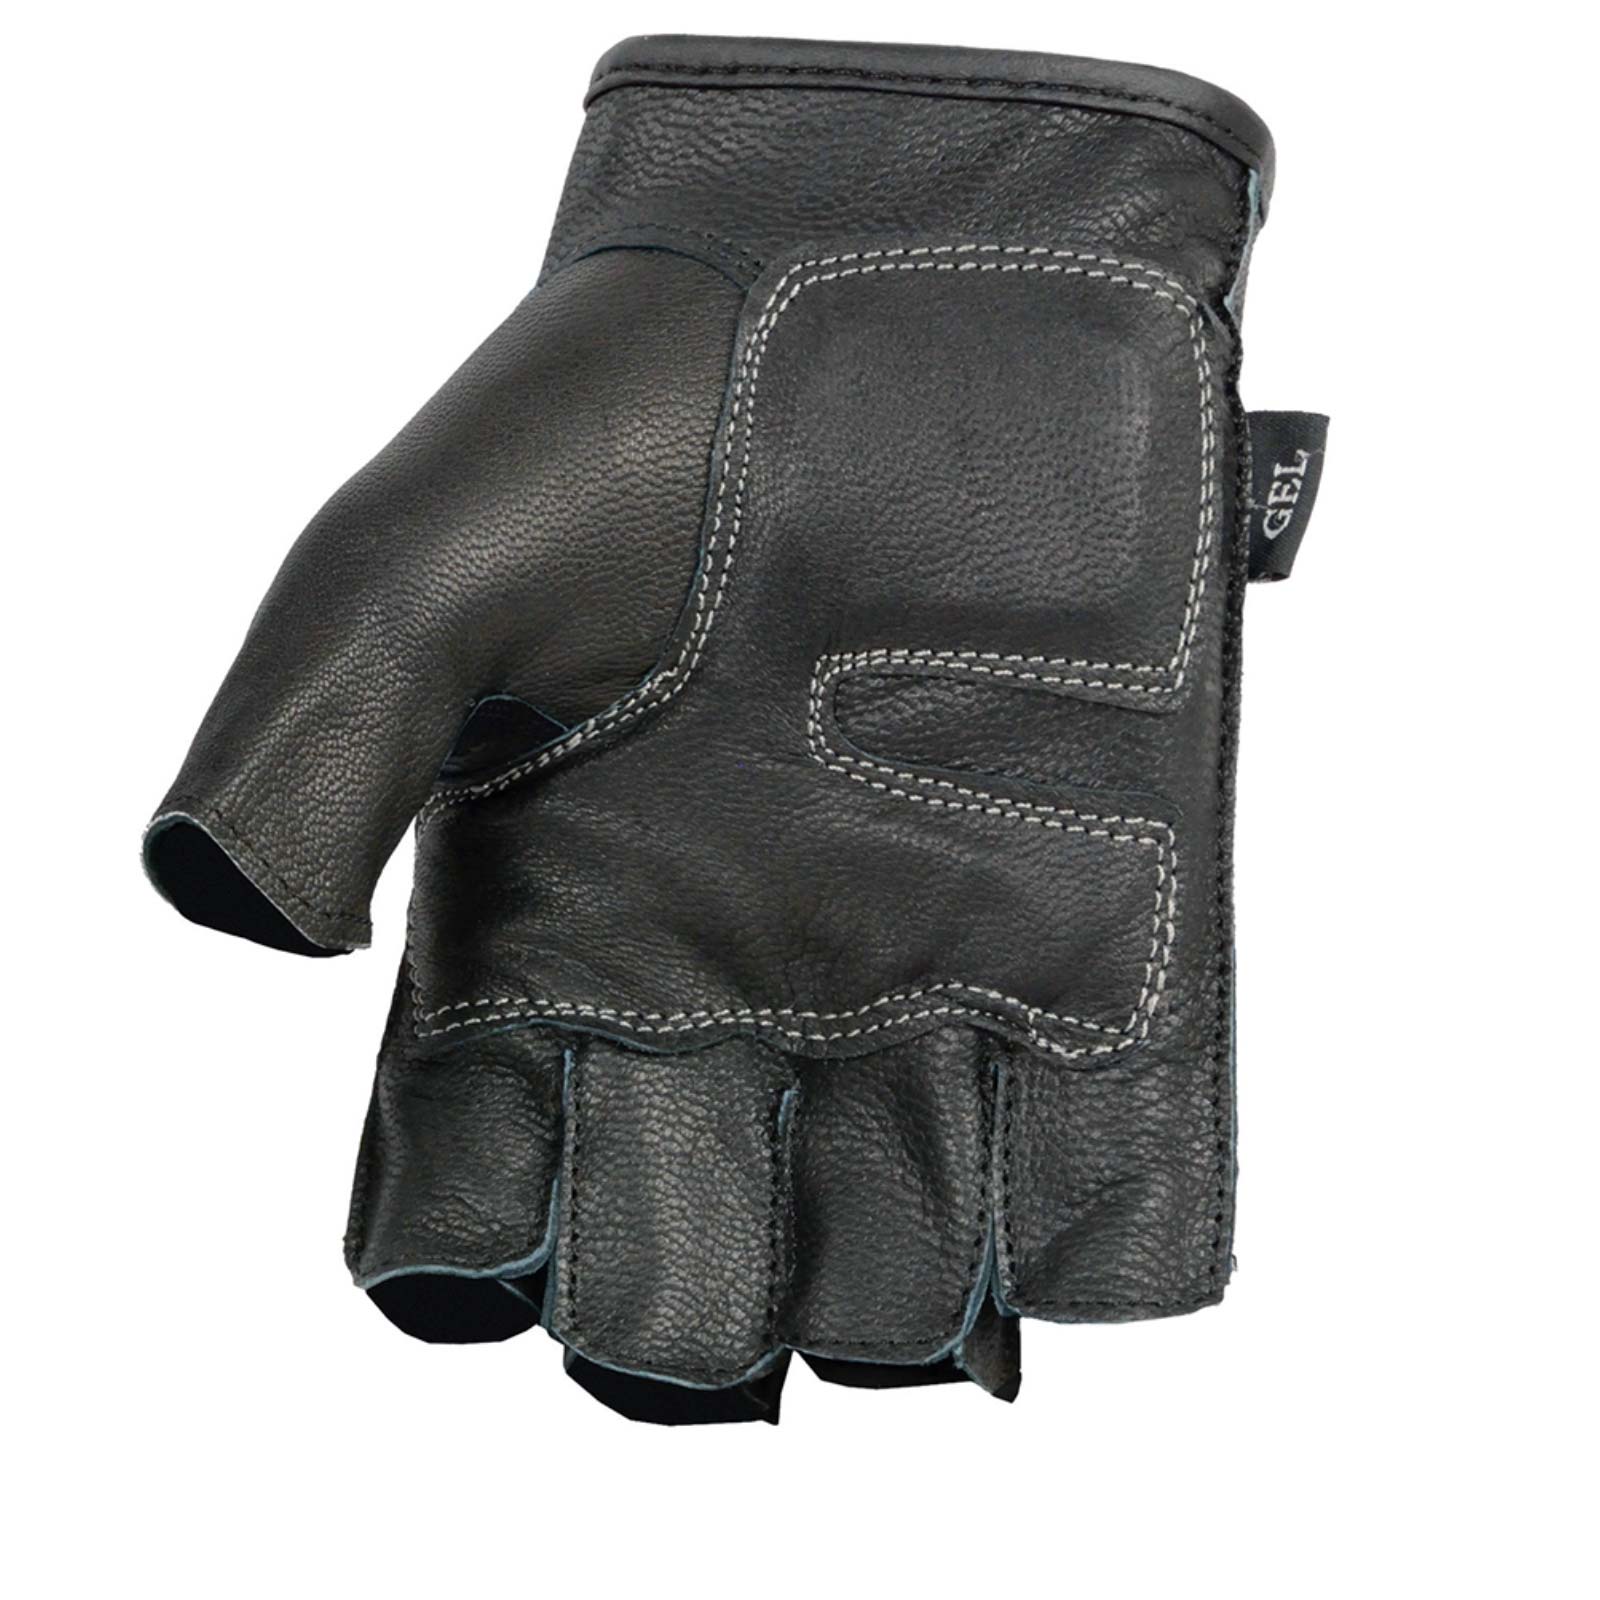 Xelement XG198 Men's Embroidered 'Flamed' Fingerless Black and Orange Motorcycle Leather Gloves